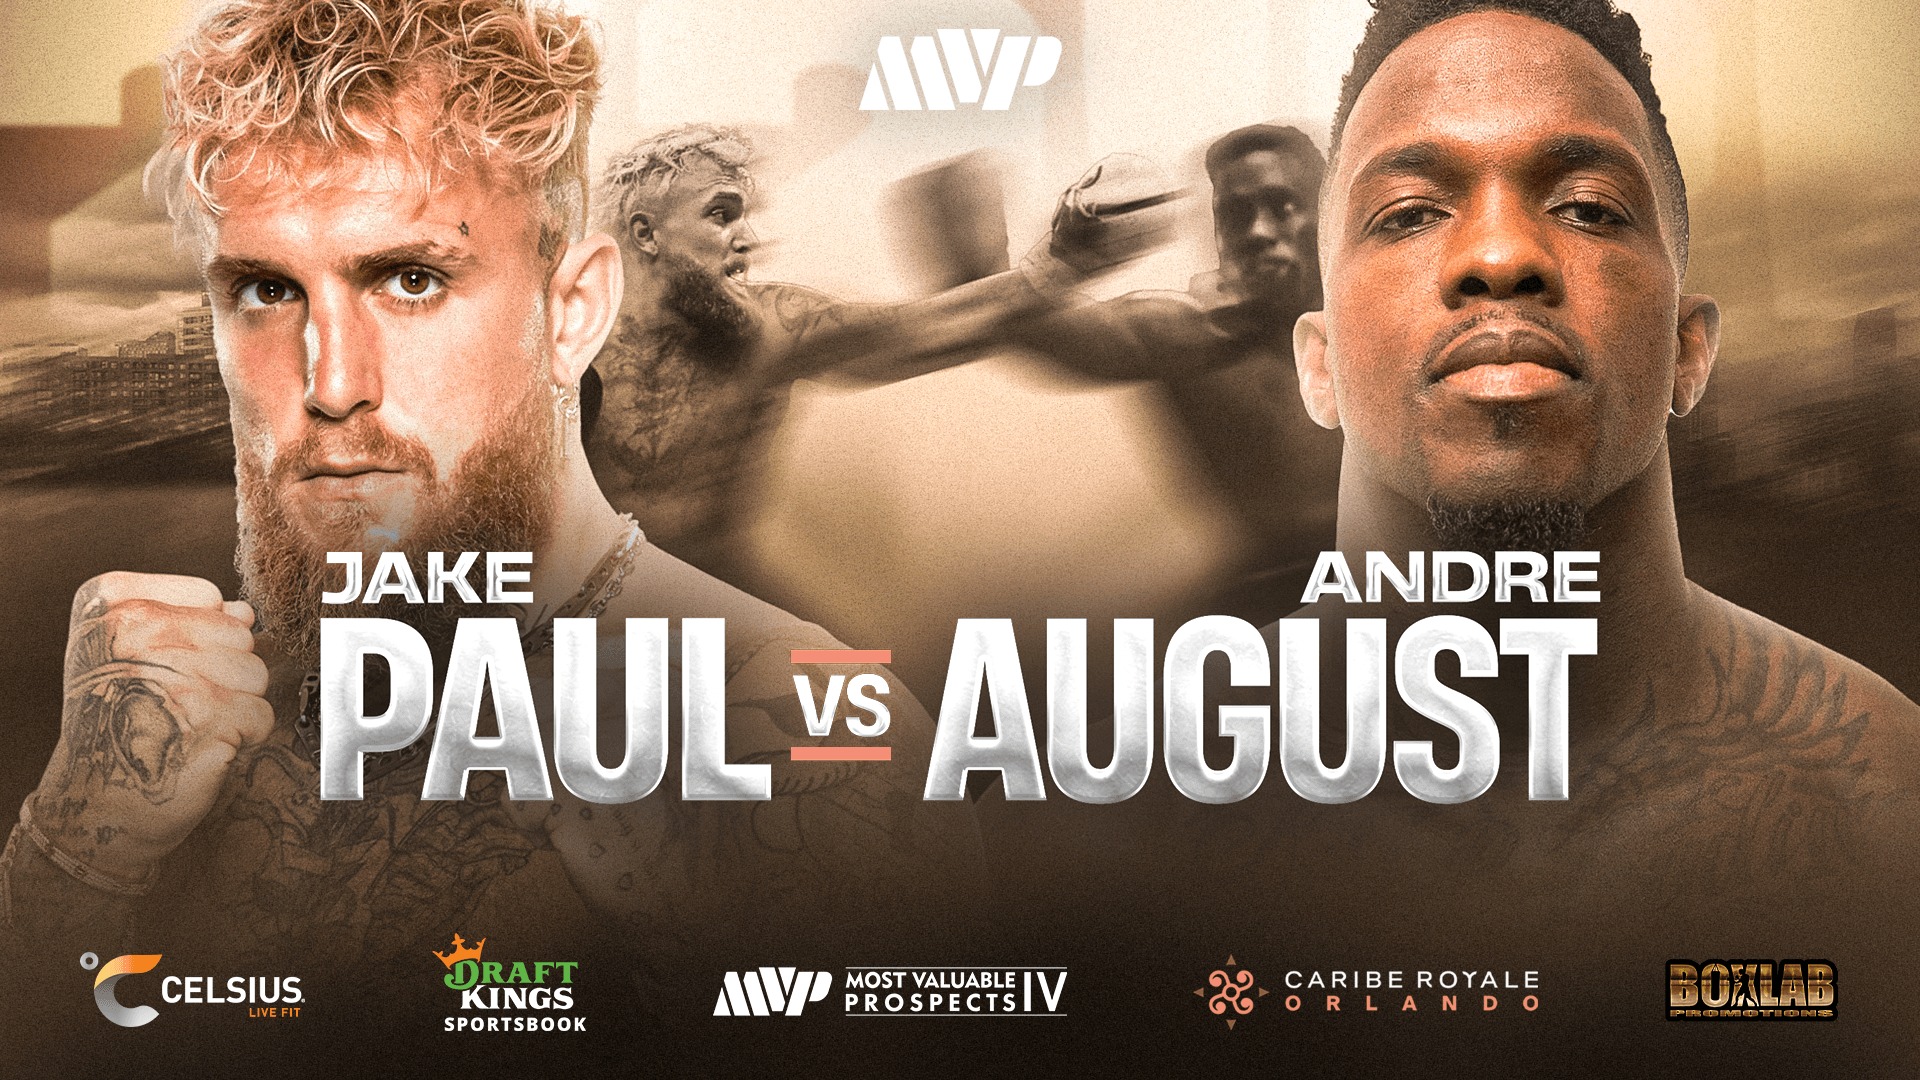 Jake Paul and Andre August on a promotional poster.